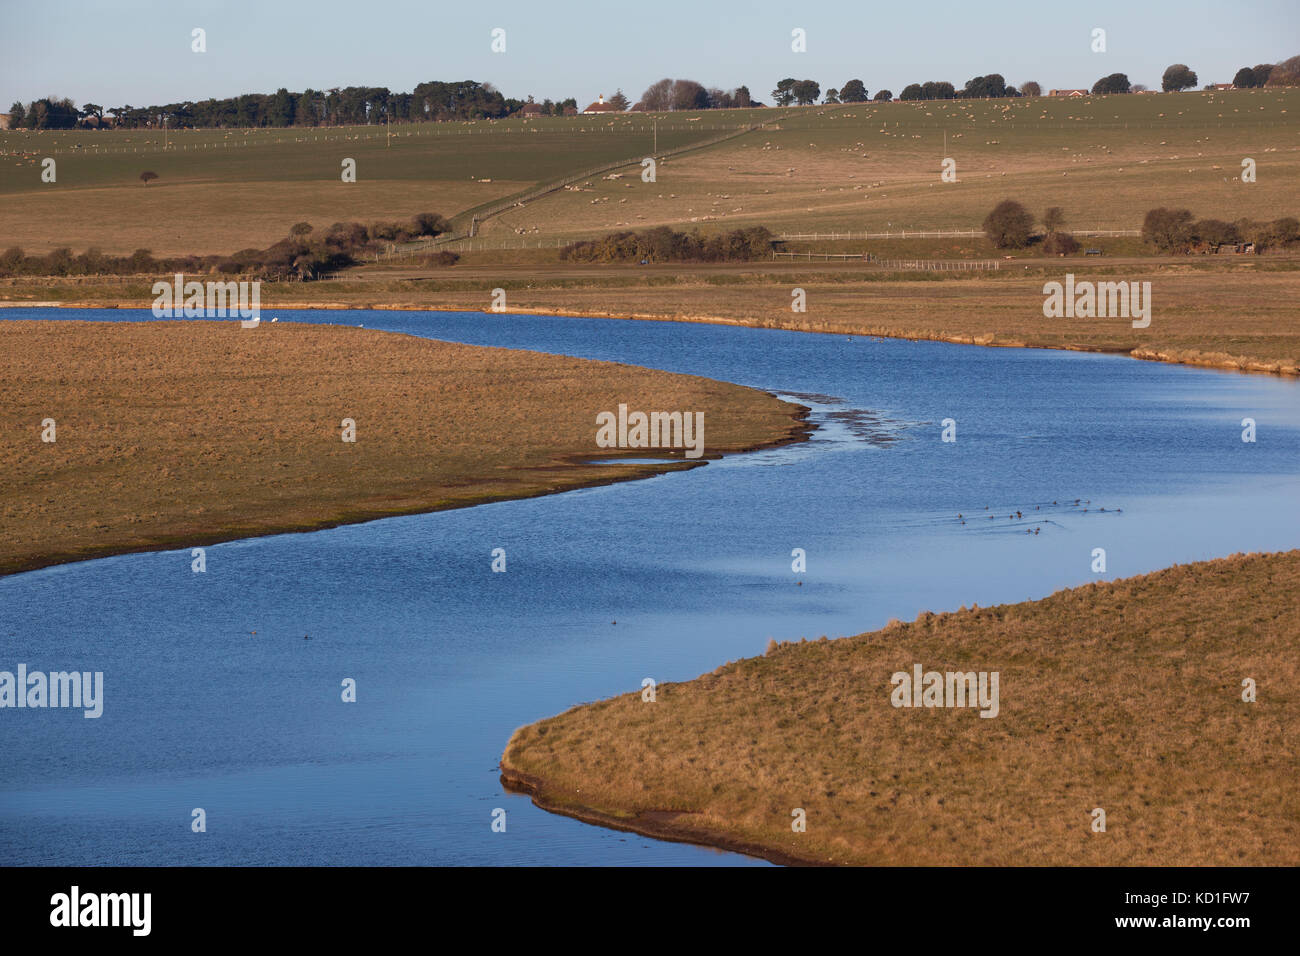 Cuckmere Estuary, Cuckmere Haven, area of flood plains in East Sussex, nature reserve overlooking the Seven Sisters Cliffs and river mouth, England UK Stock Photo